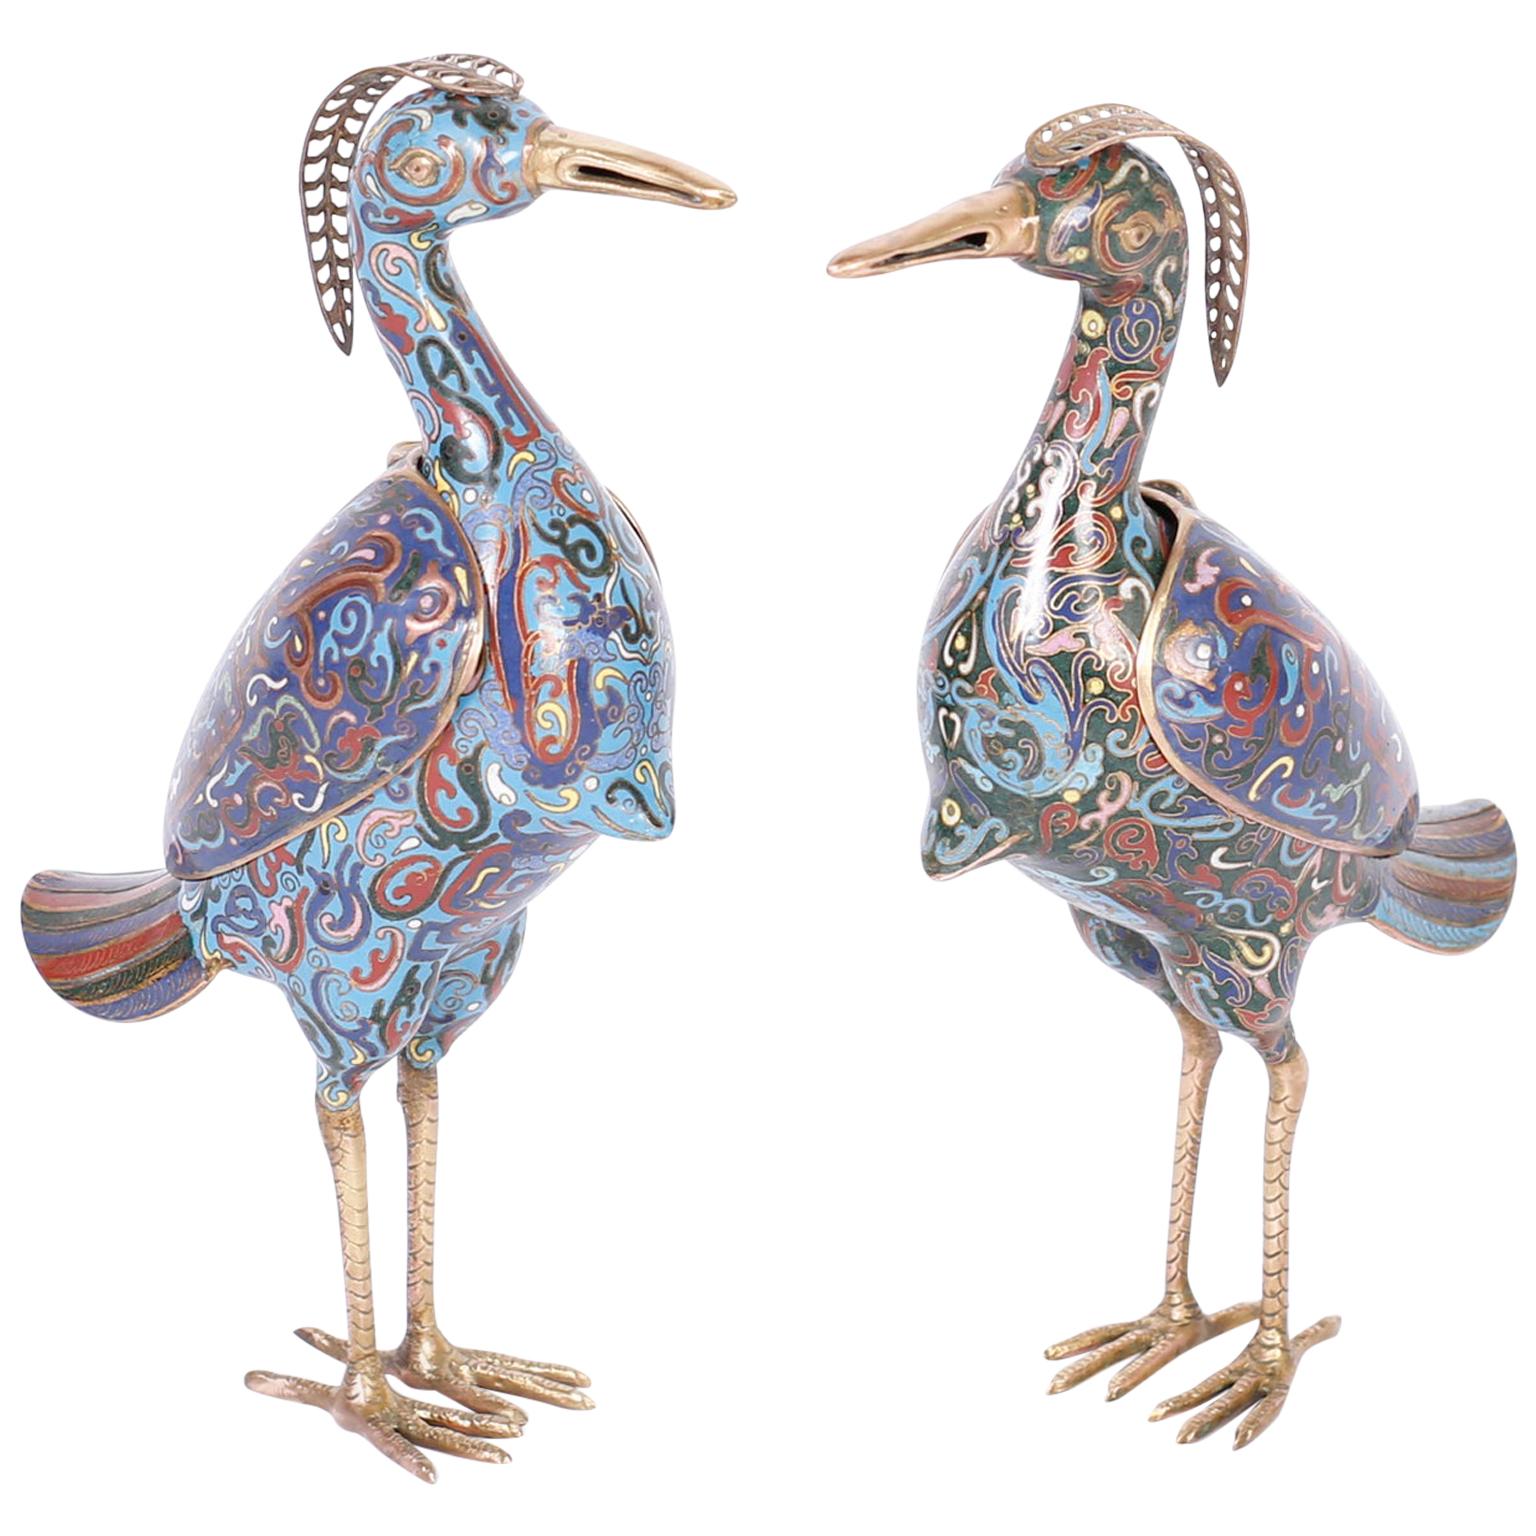 Pair of Chinese Cloisonné Birds or Quails For Sale